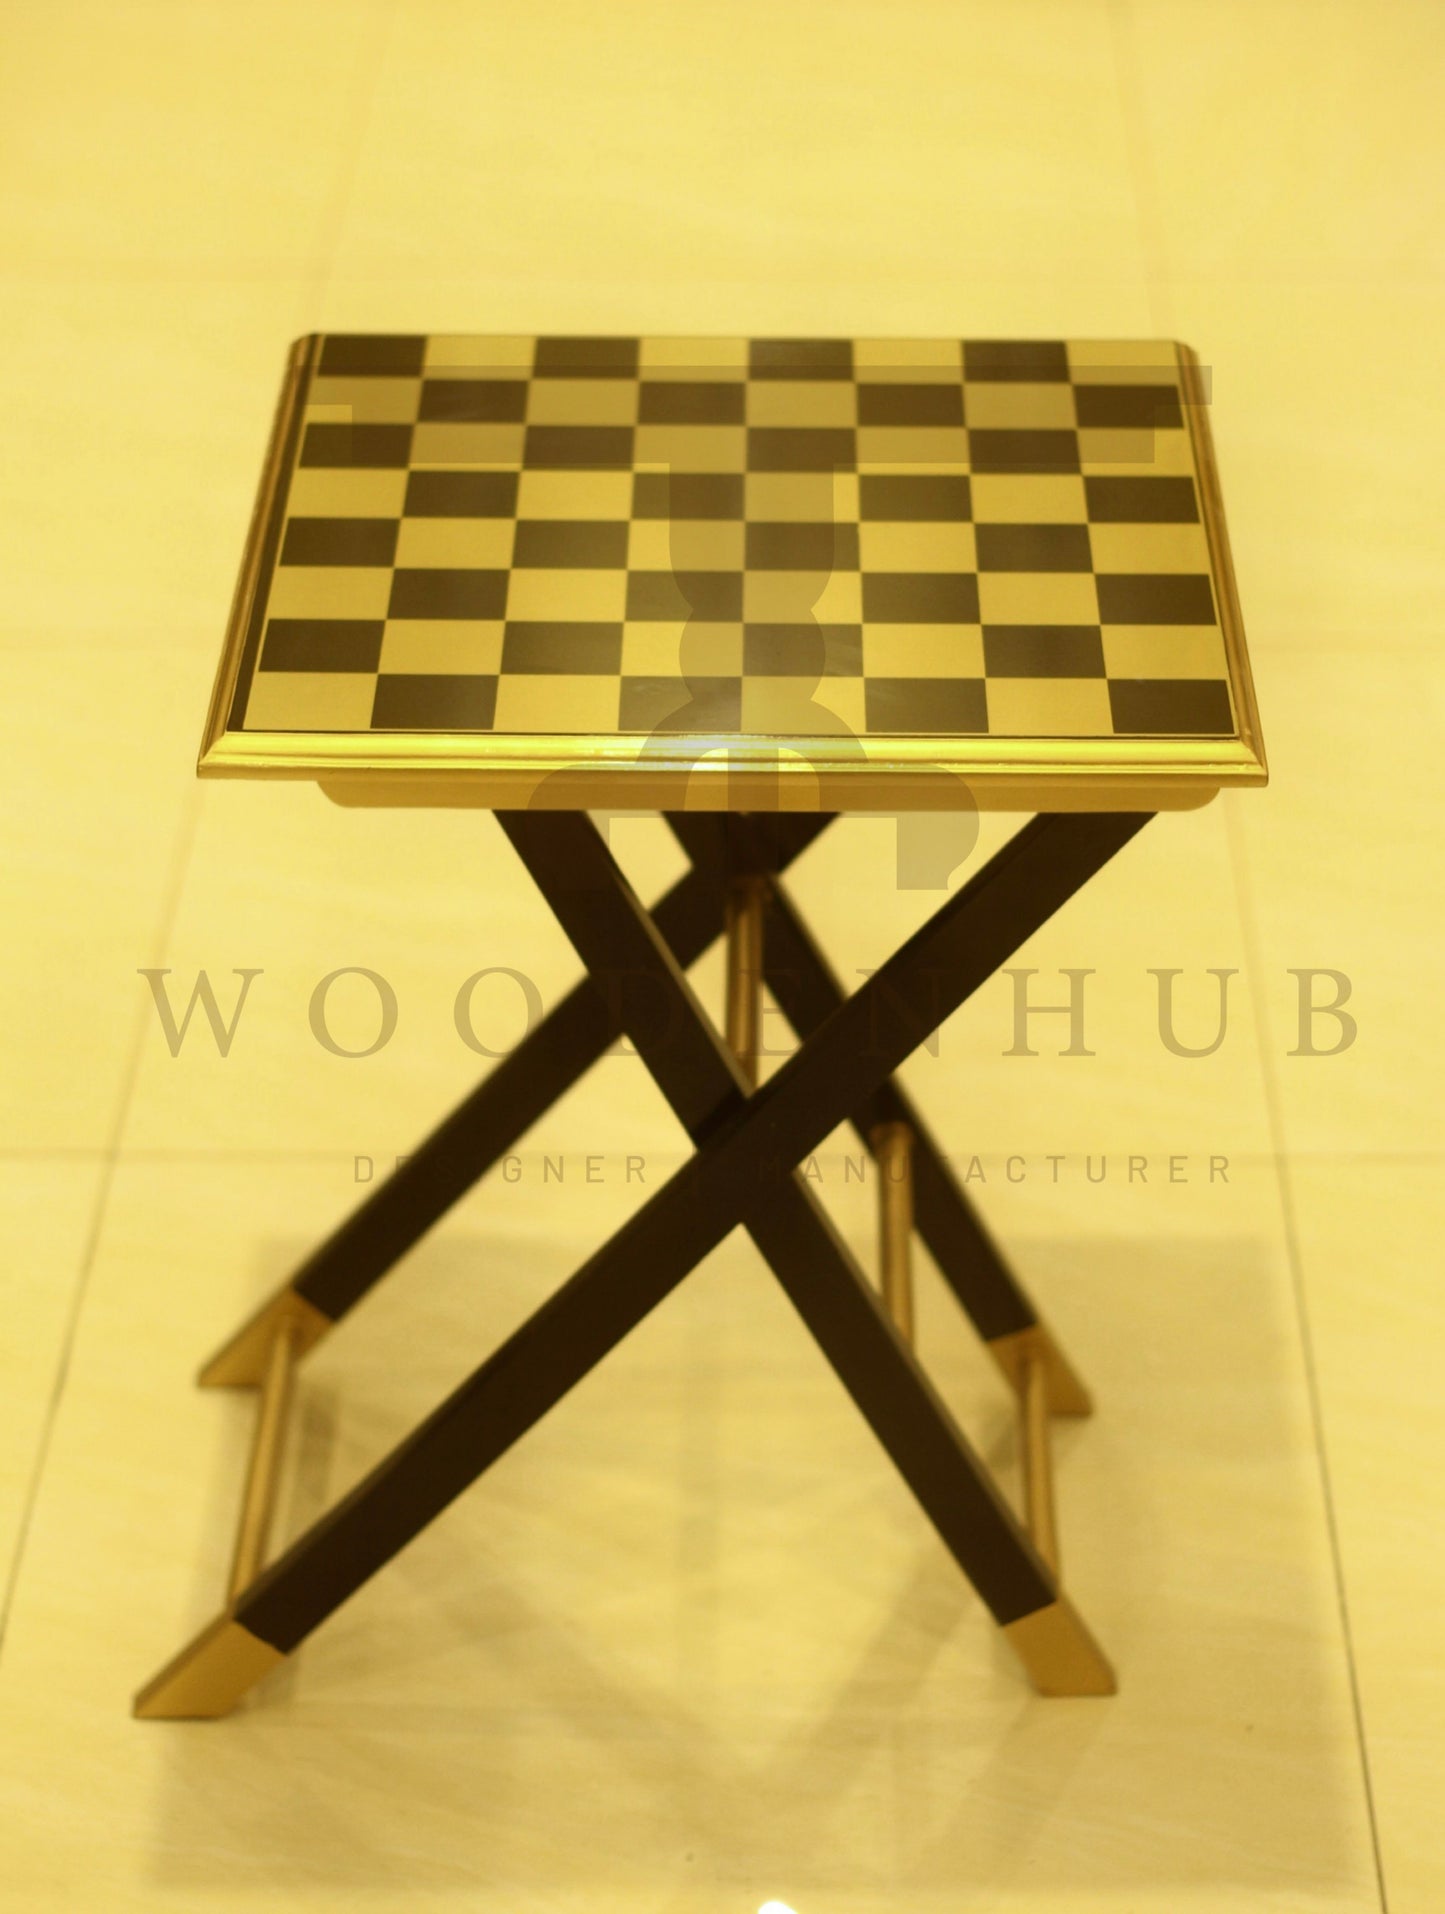 CHESS SERVING TABLE SET (4PC)